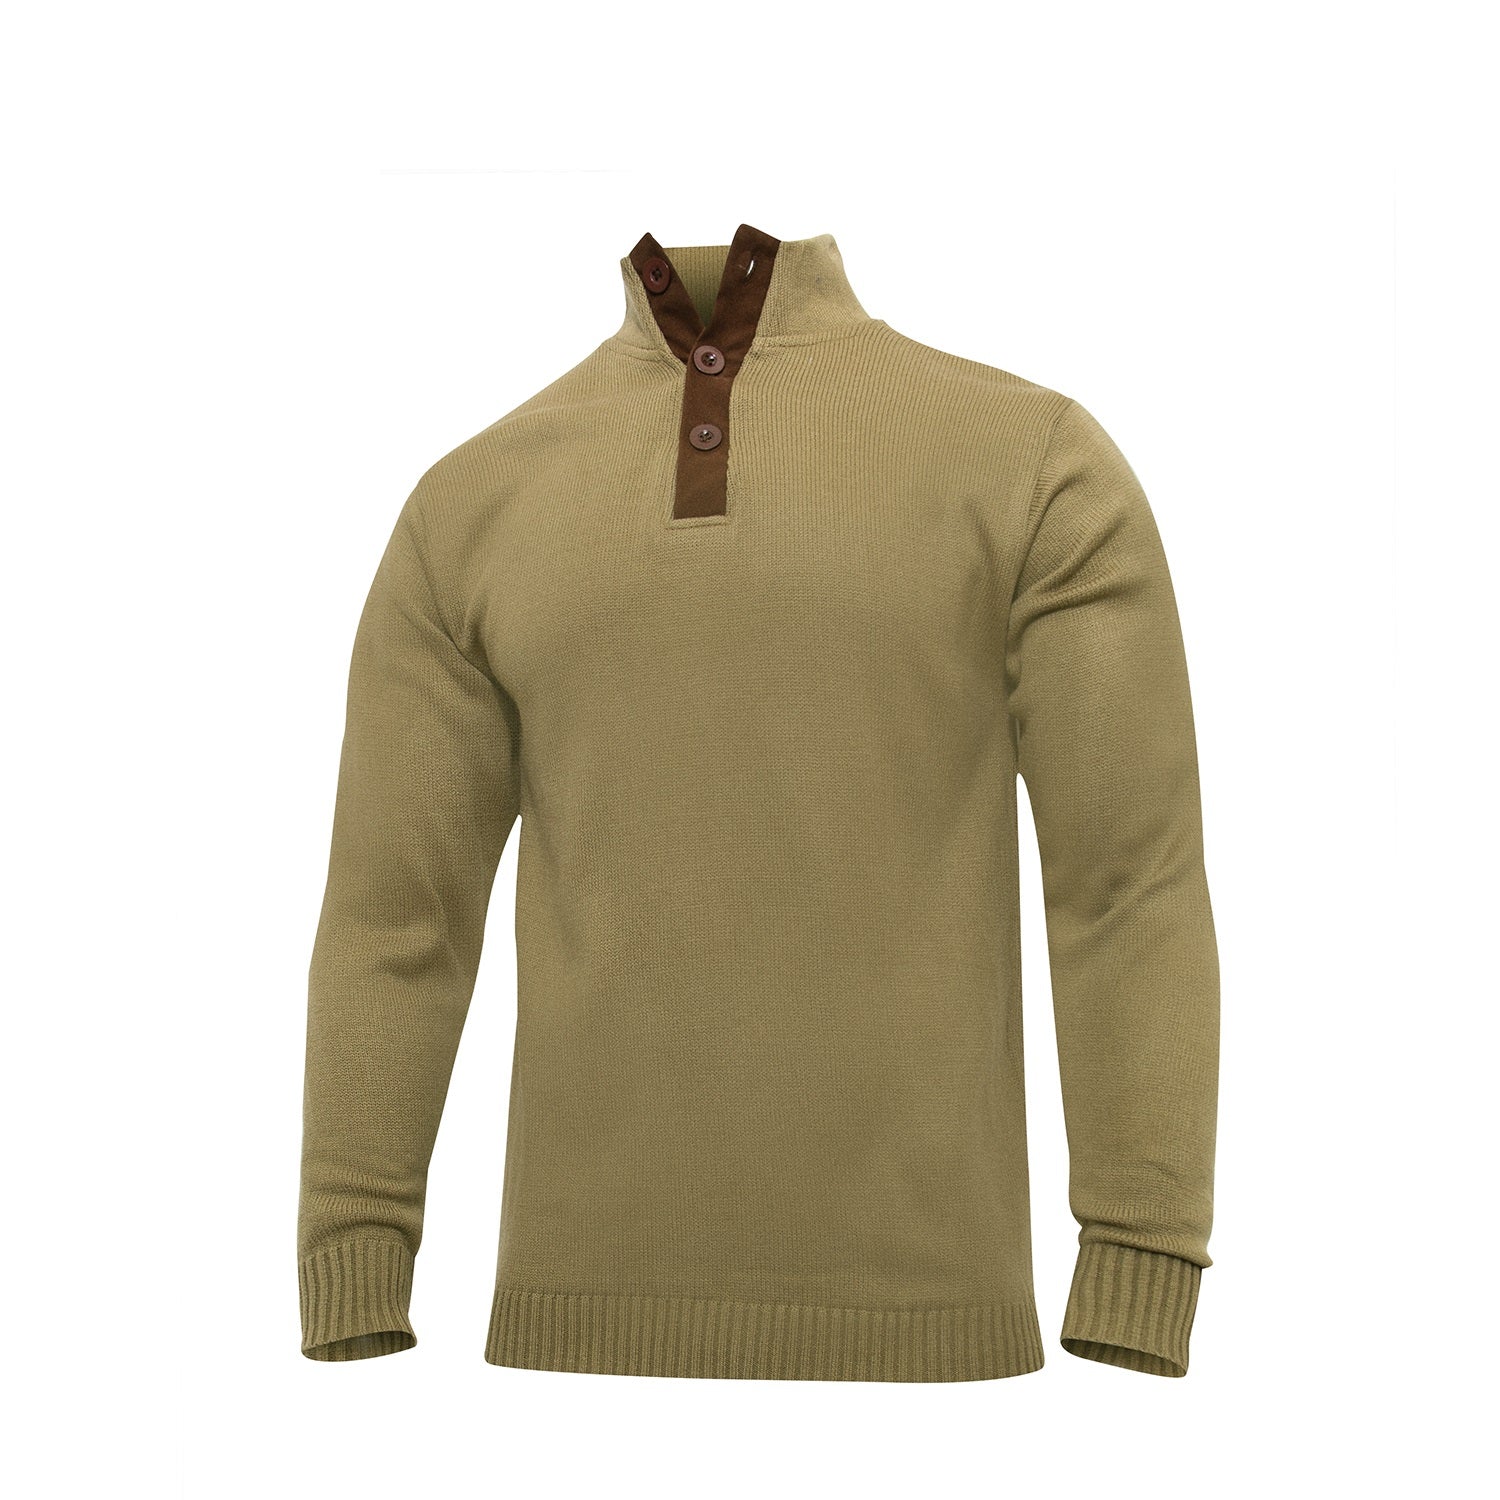 Rothco 3-Button Sweater With Suede Accents – Military Uniform Supply, Inc.